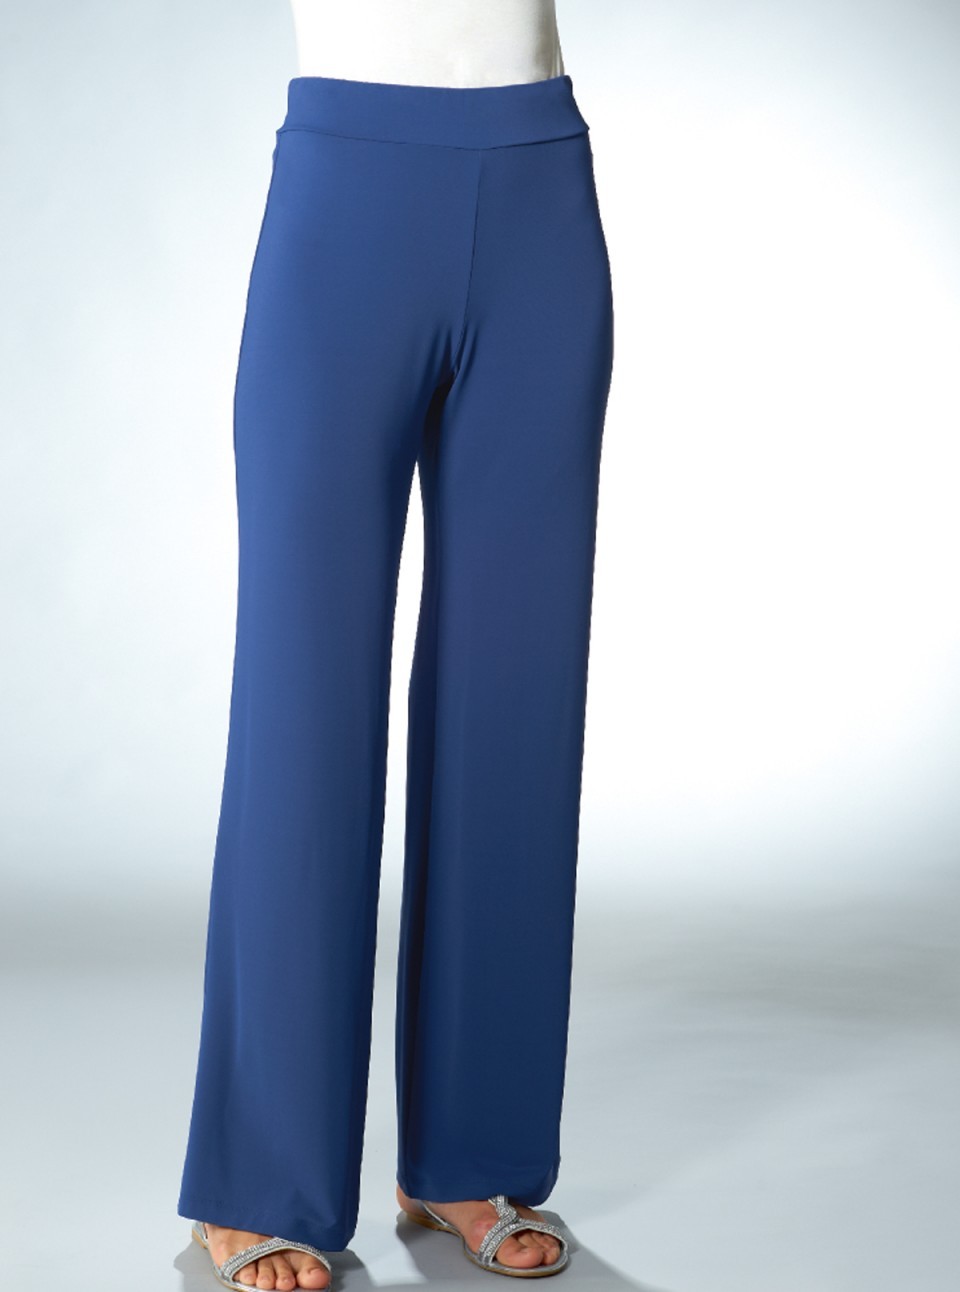 dn palazzo trousers